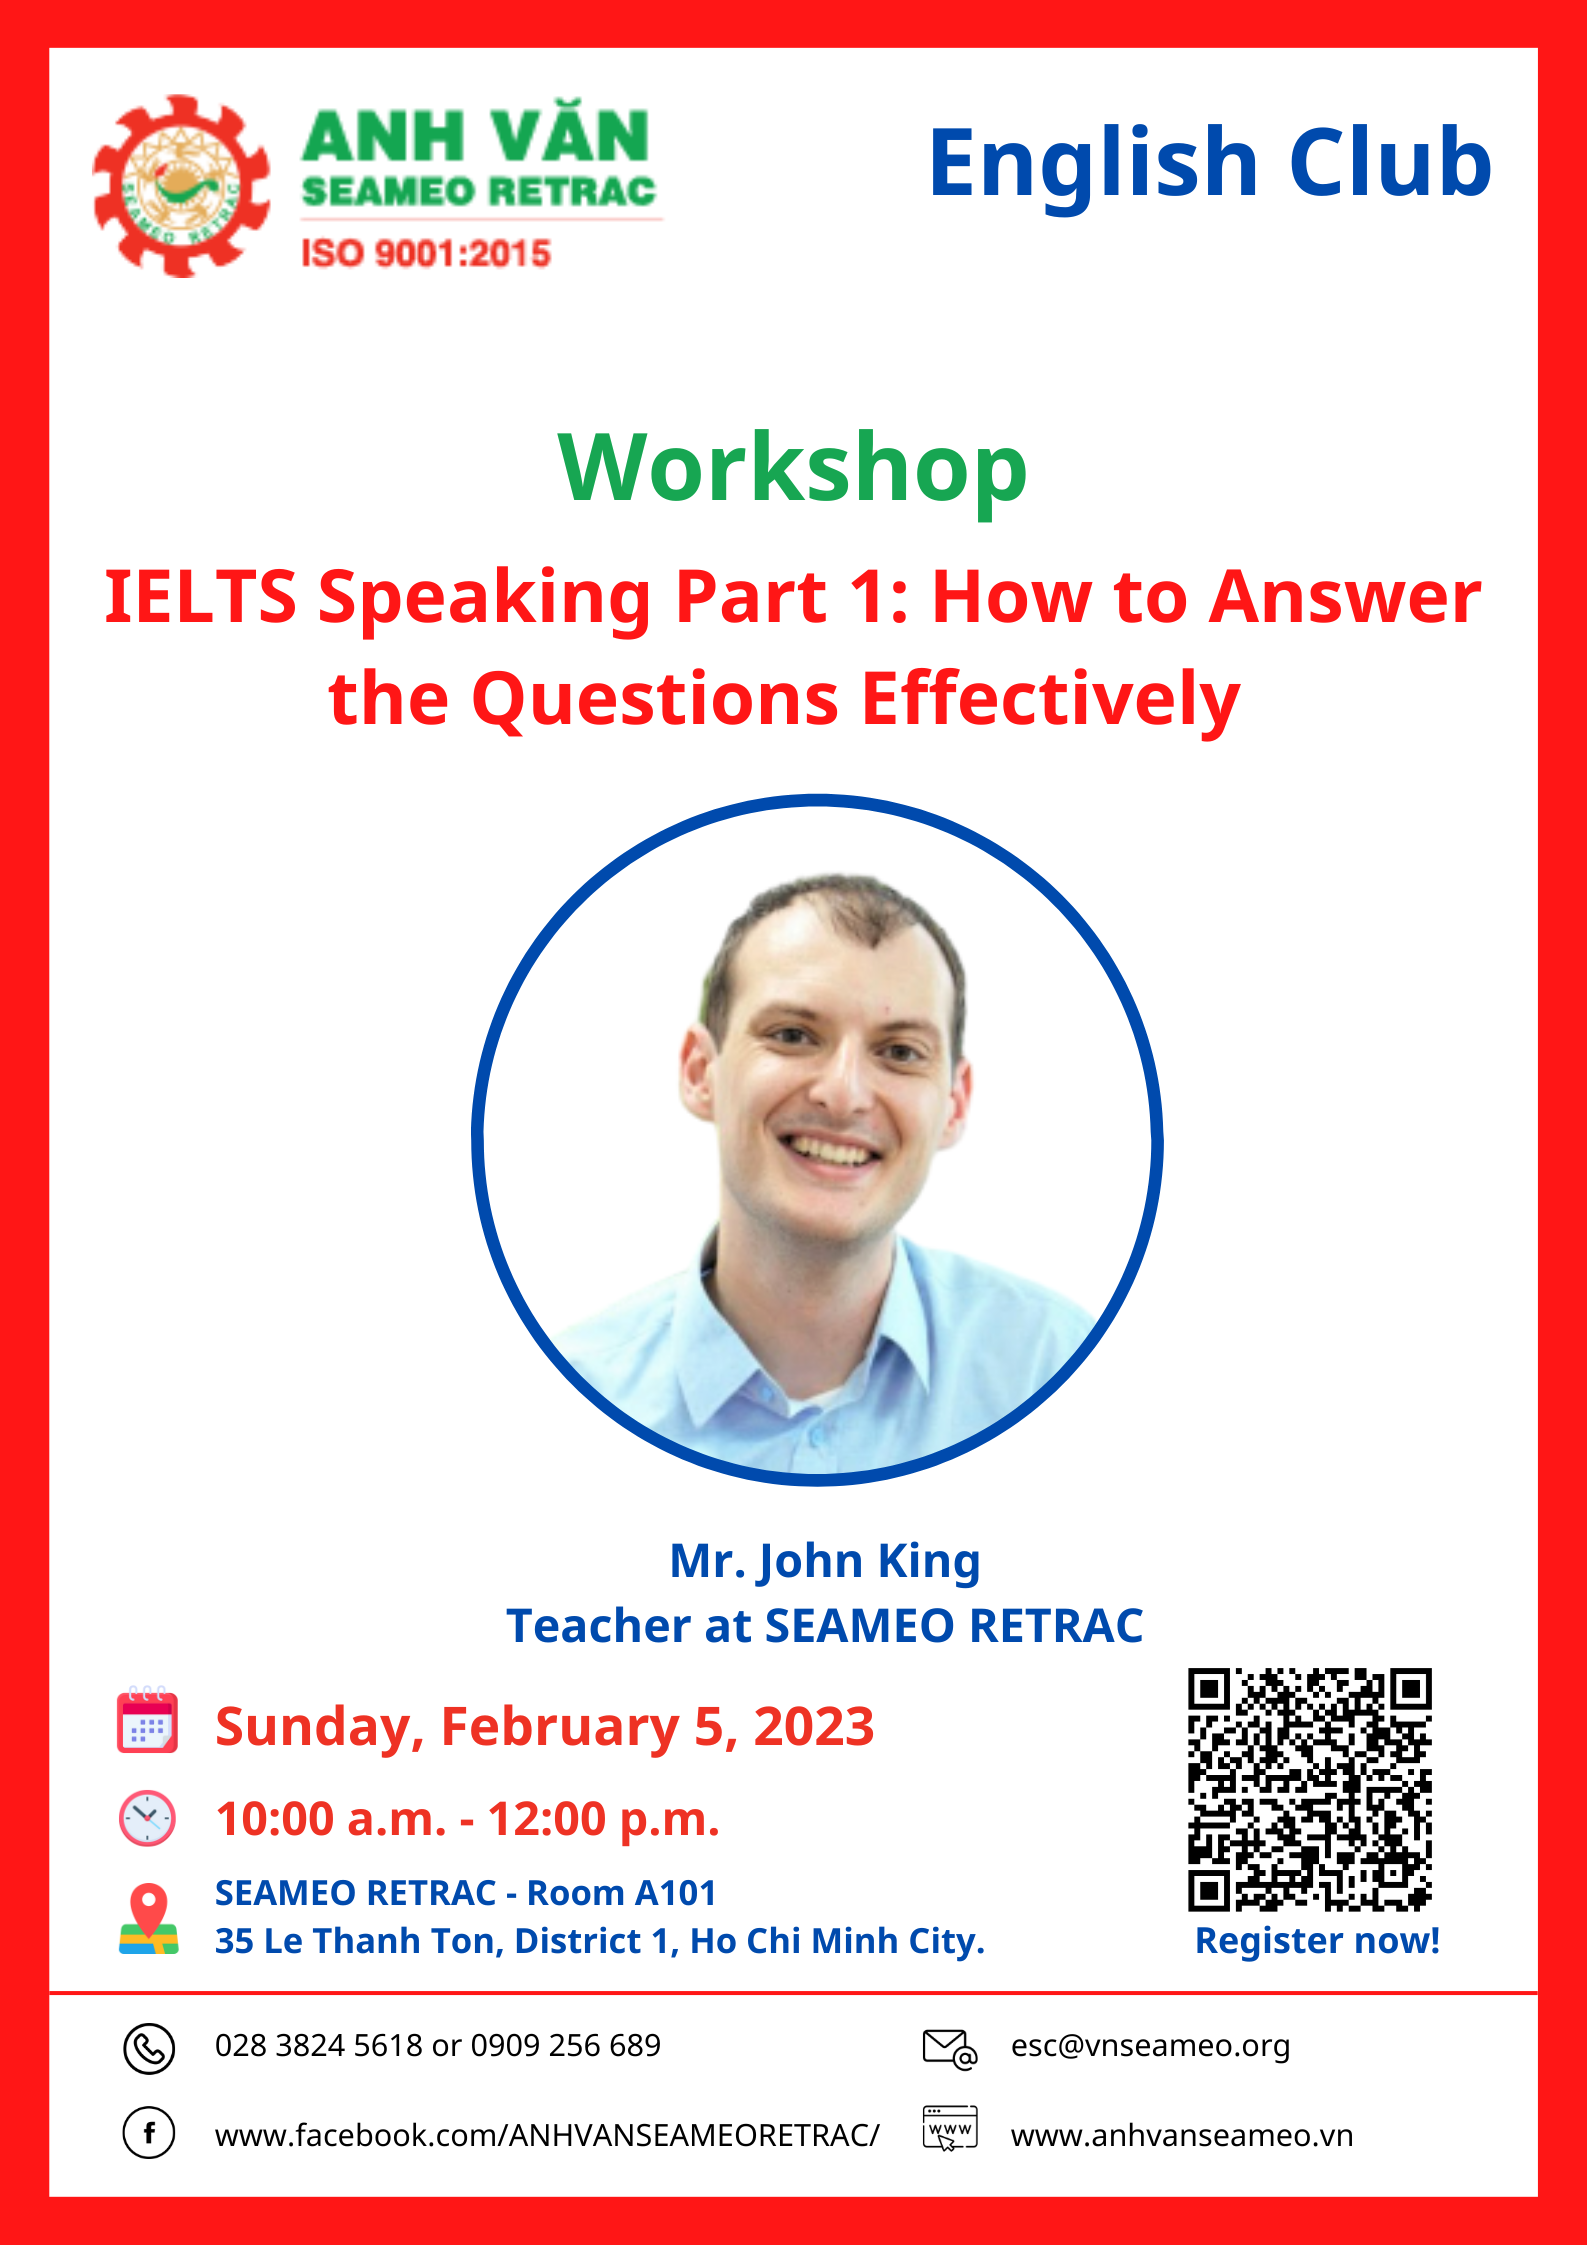 Workshop titled “IELTS Speaking Part 1: How to Answer the Questions Effectively”